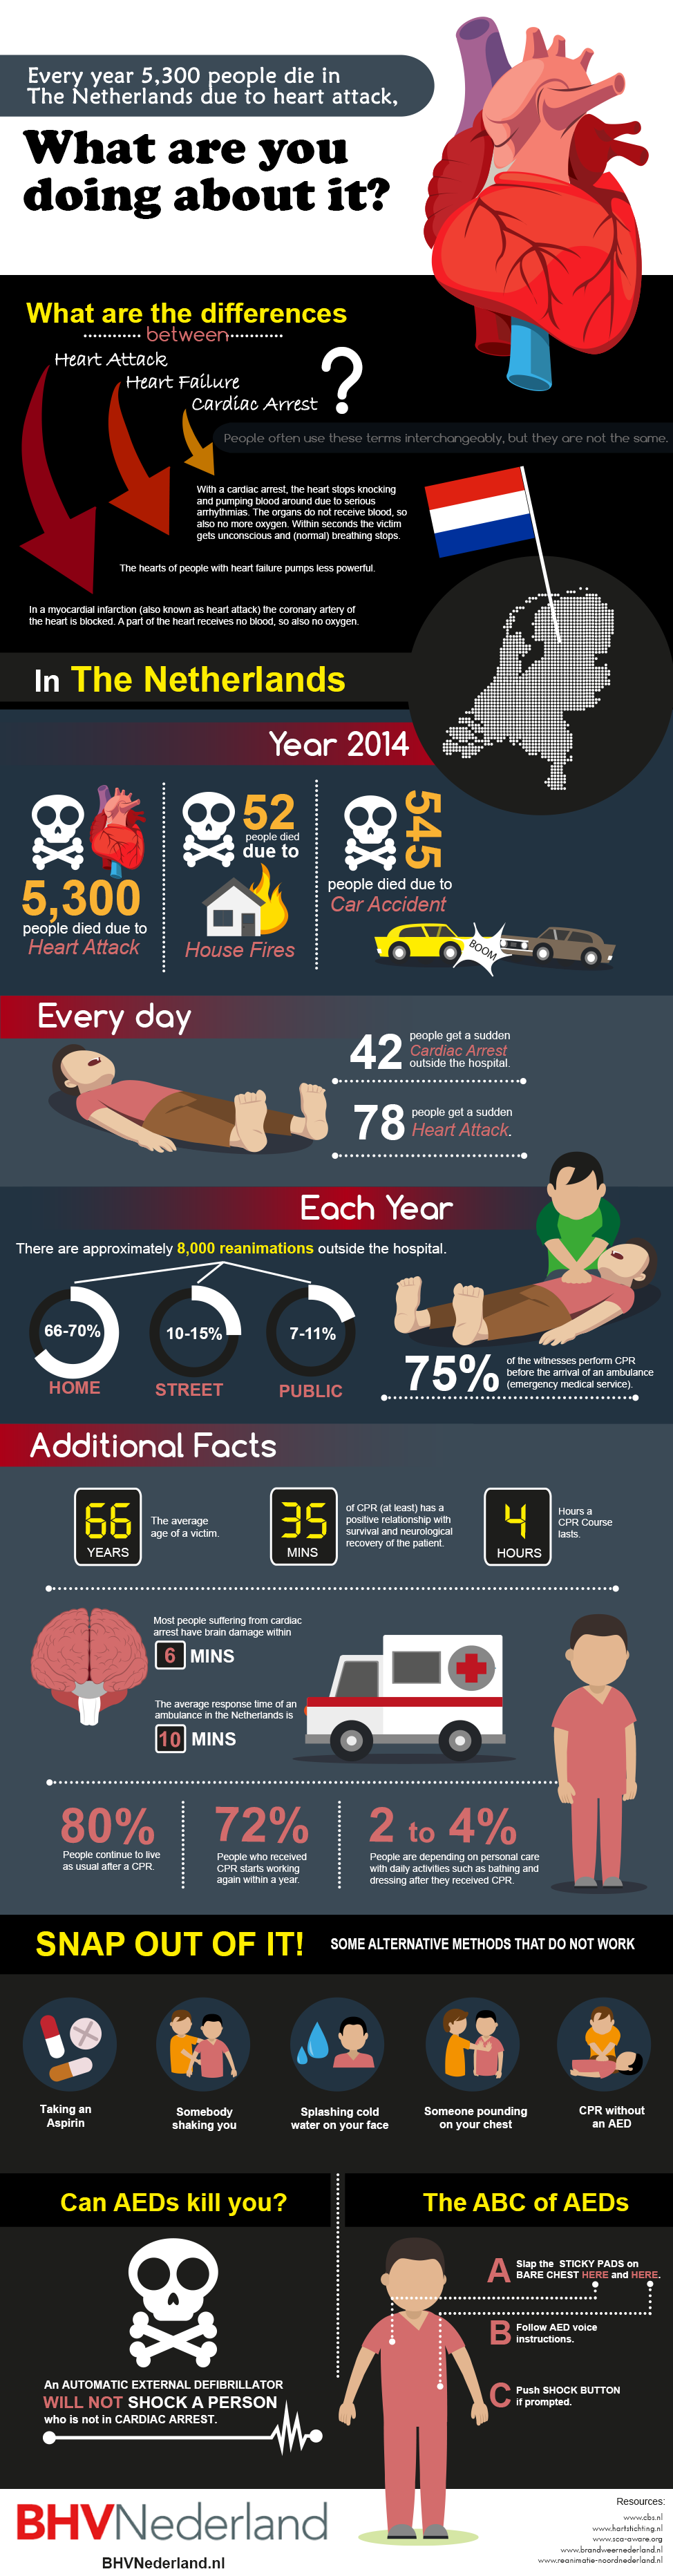 AED infographic